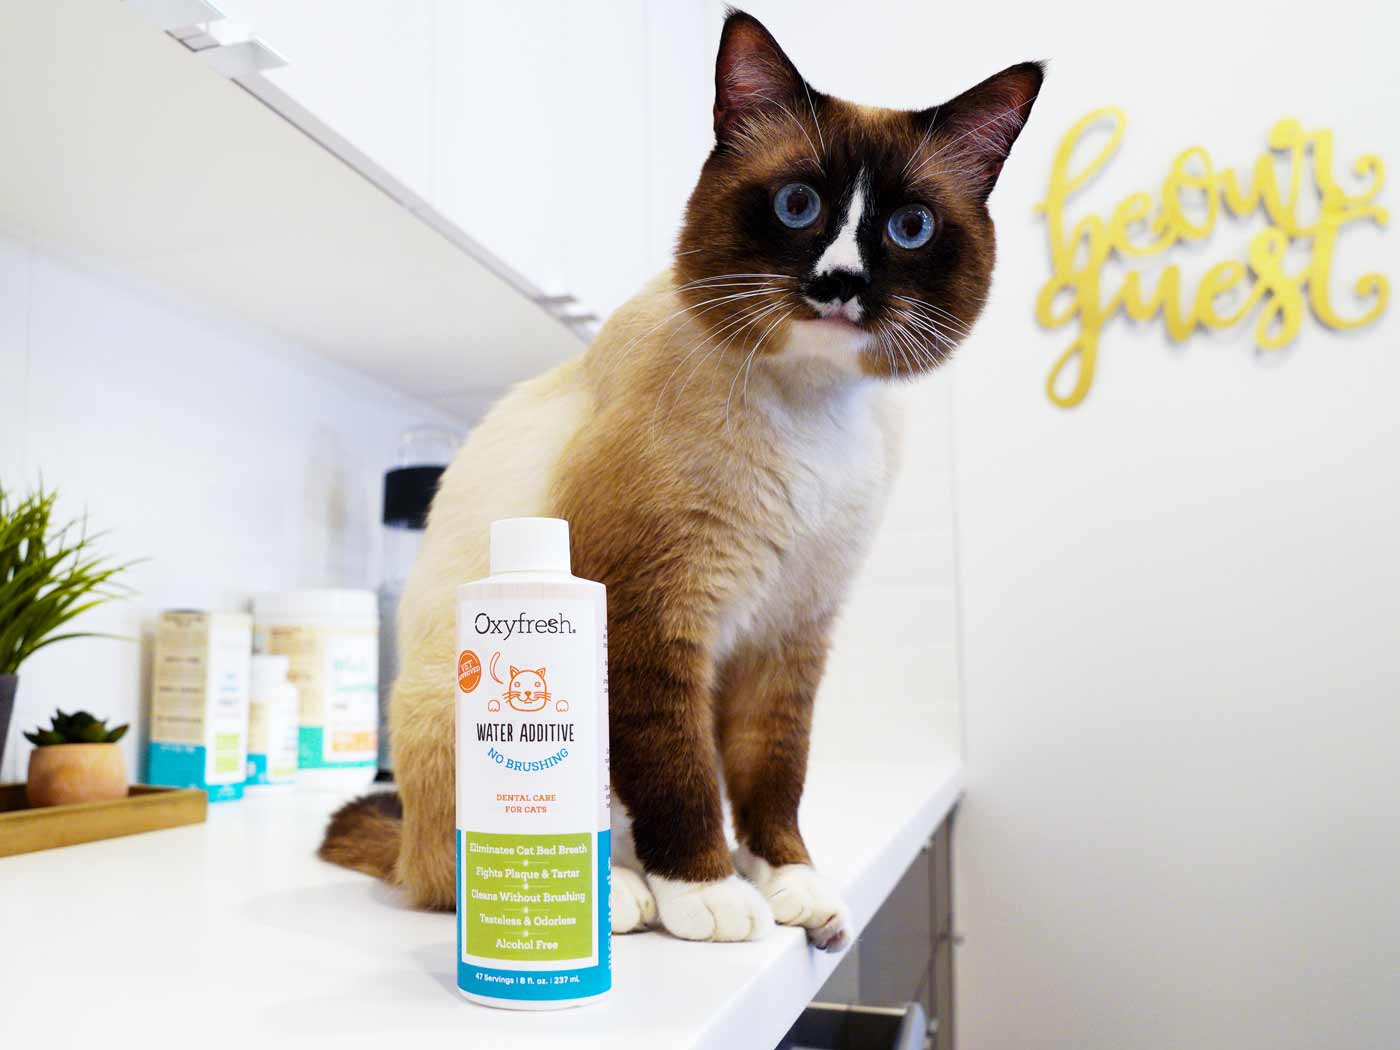 Cute-kitty-sitting-on-counter-next-to-oxyfresh-pet-dental-water-additive-for-fresh-breath